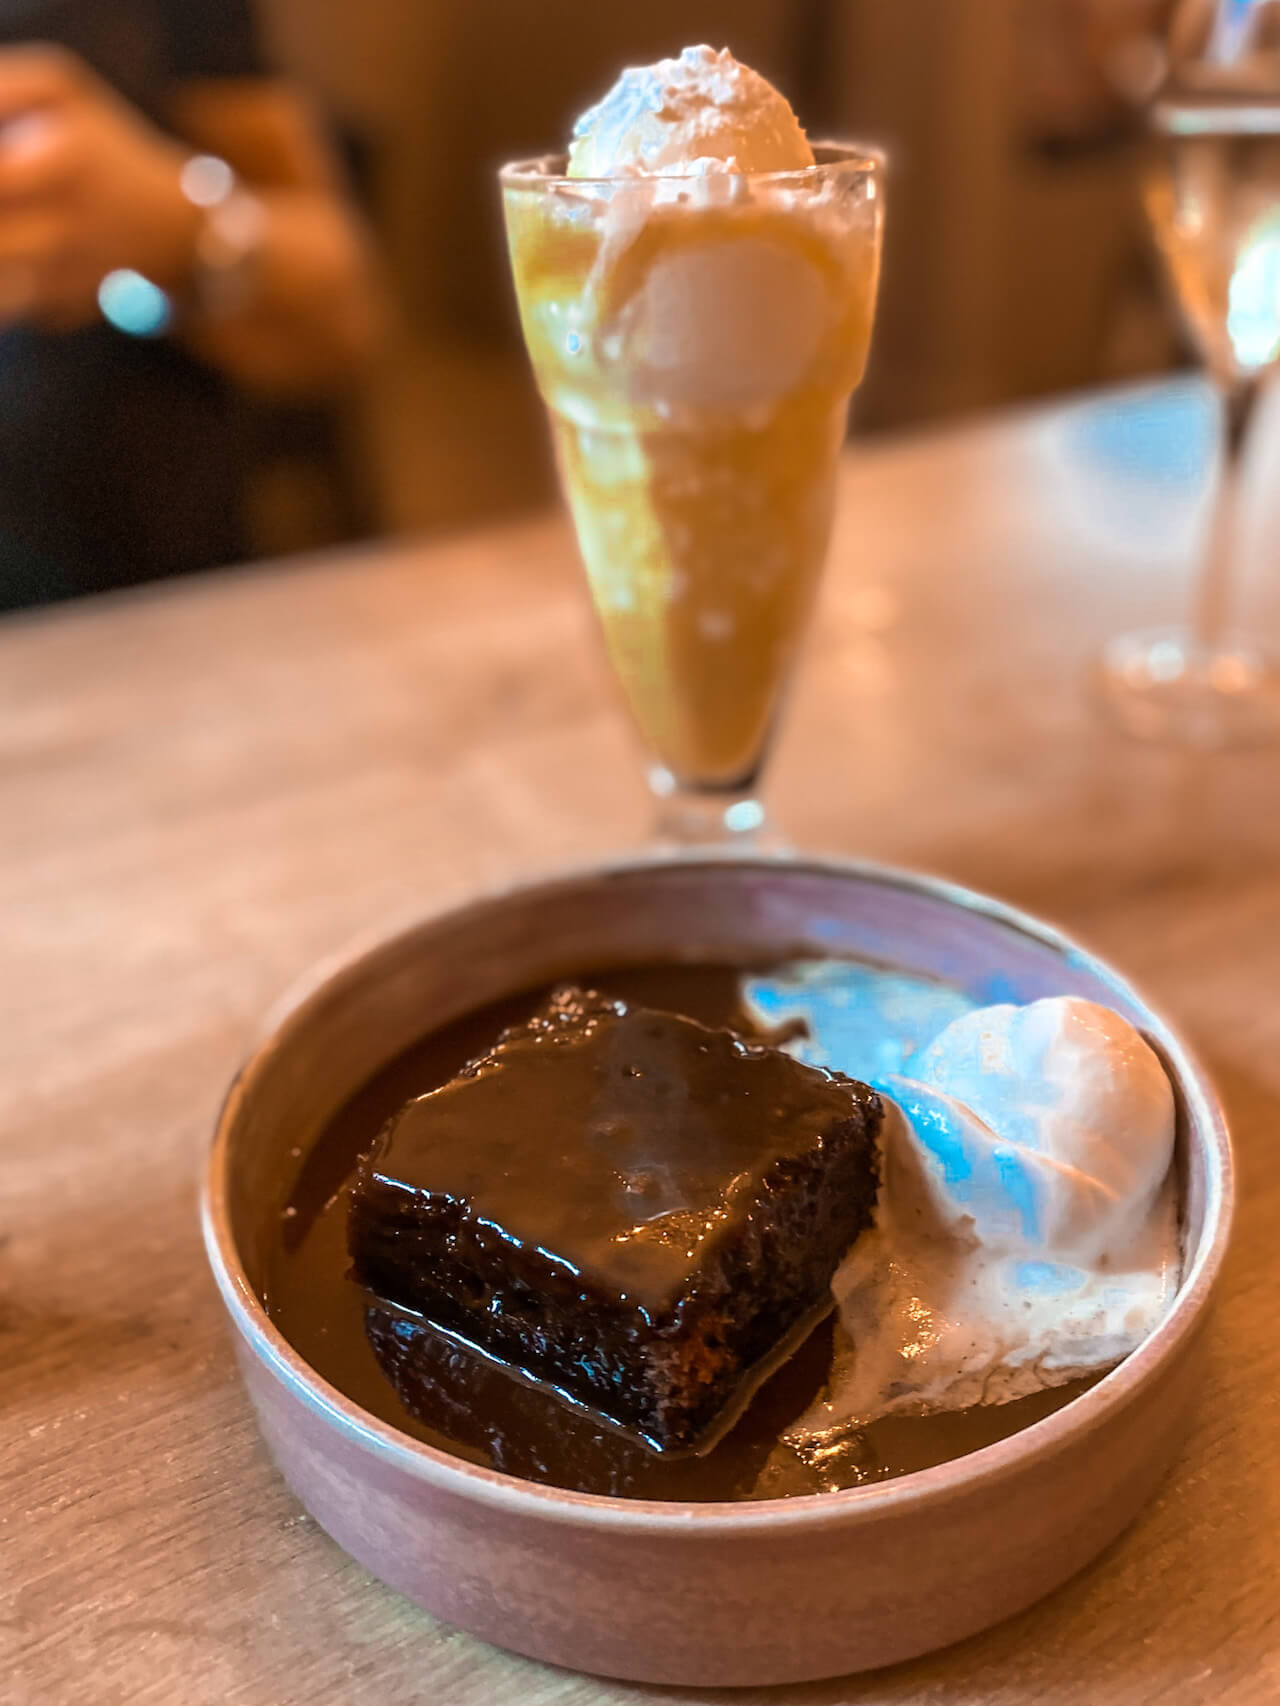 Sticky toffee pudding at The Apple Inn